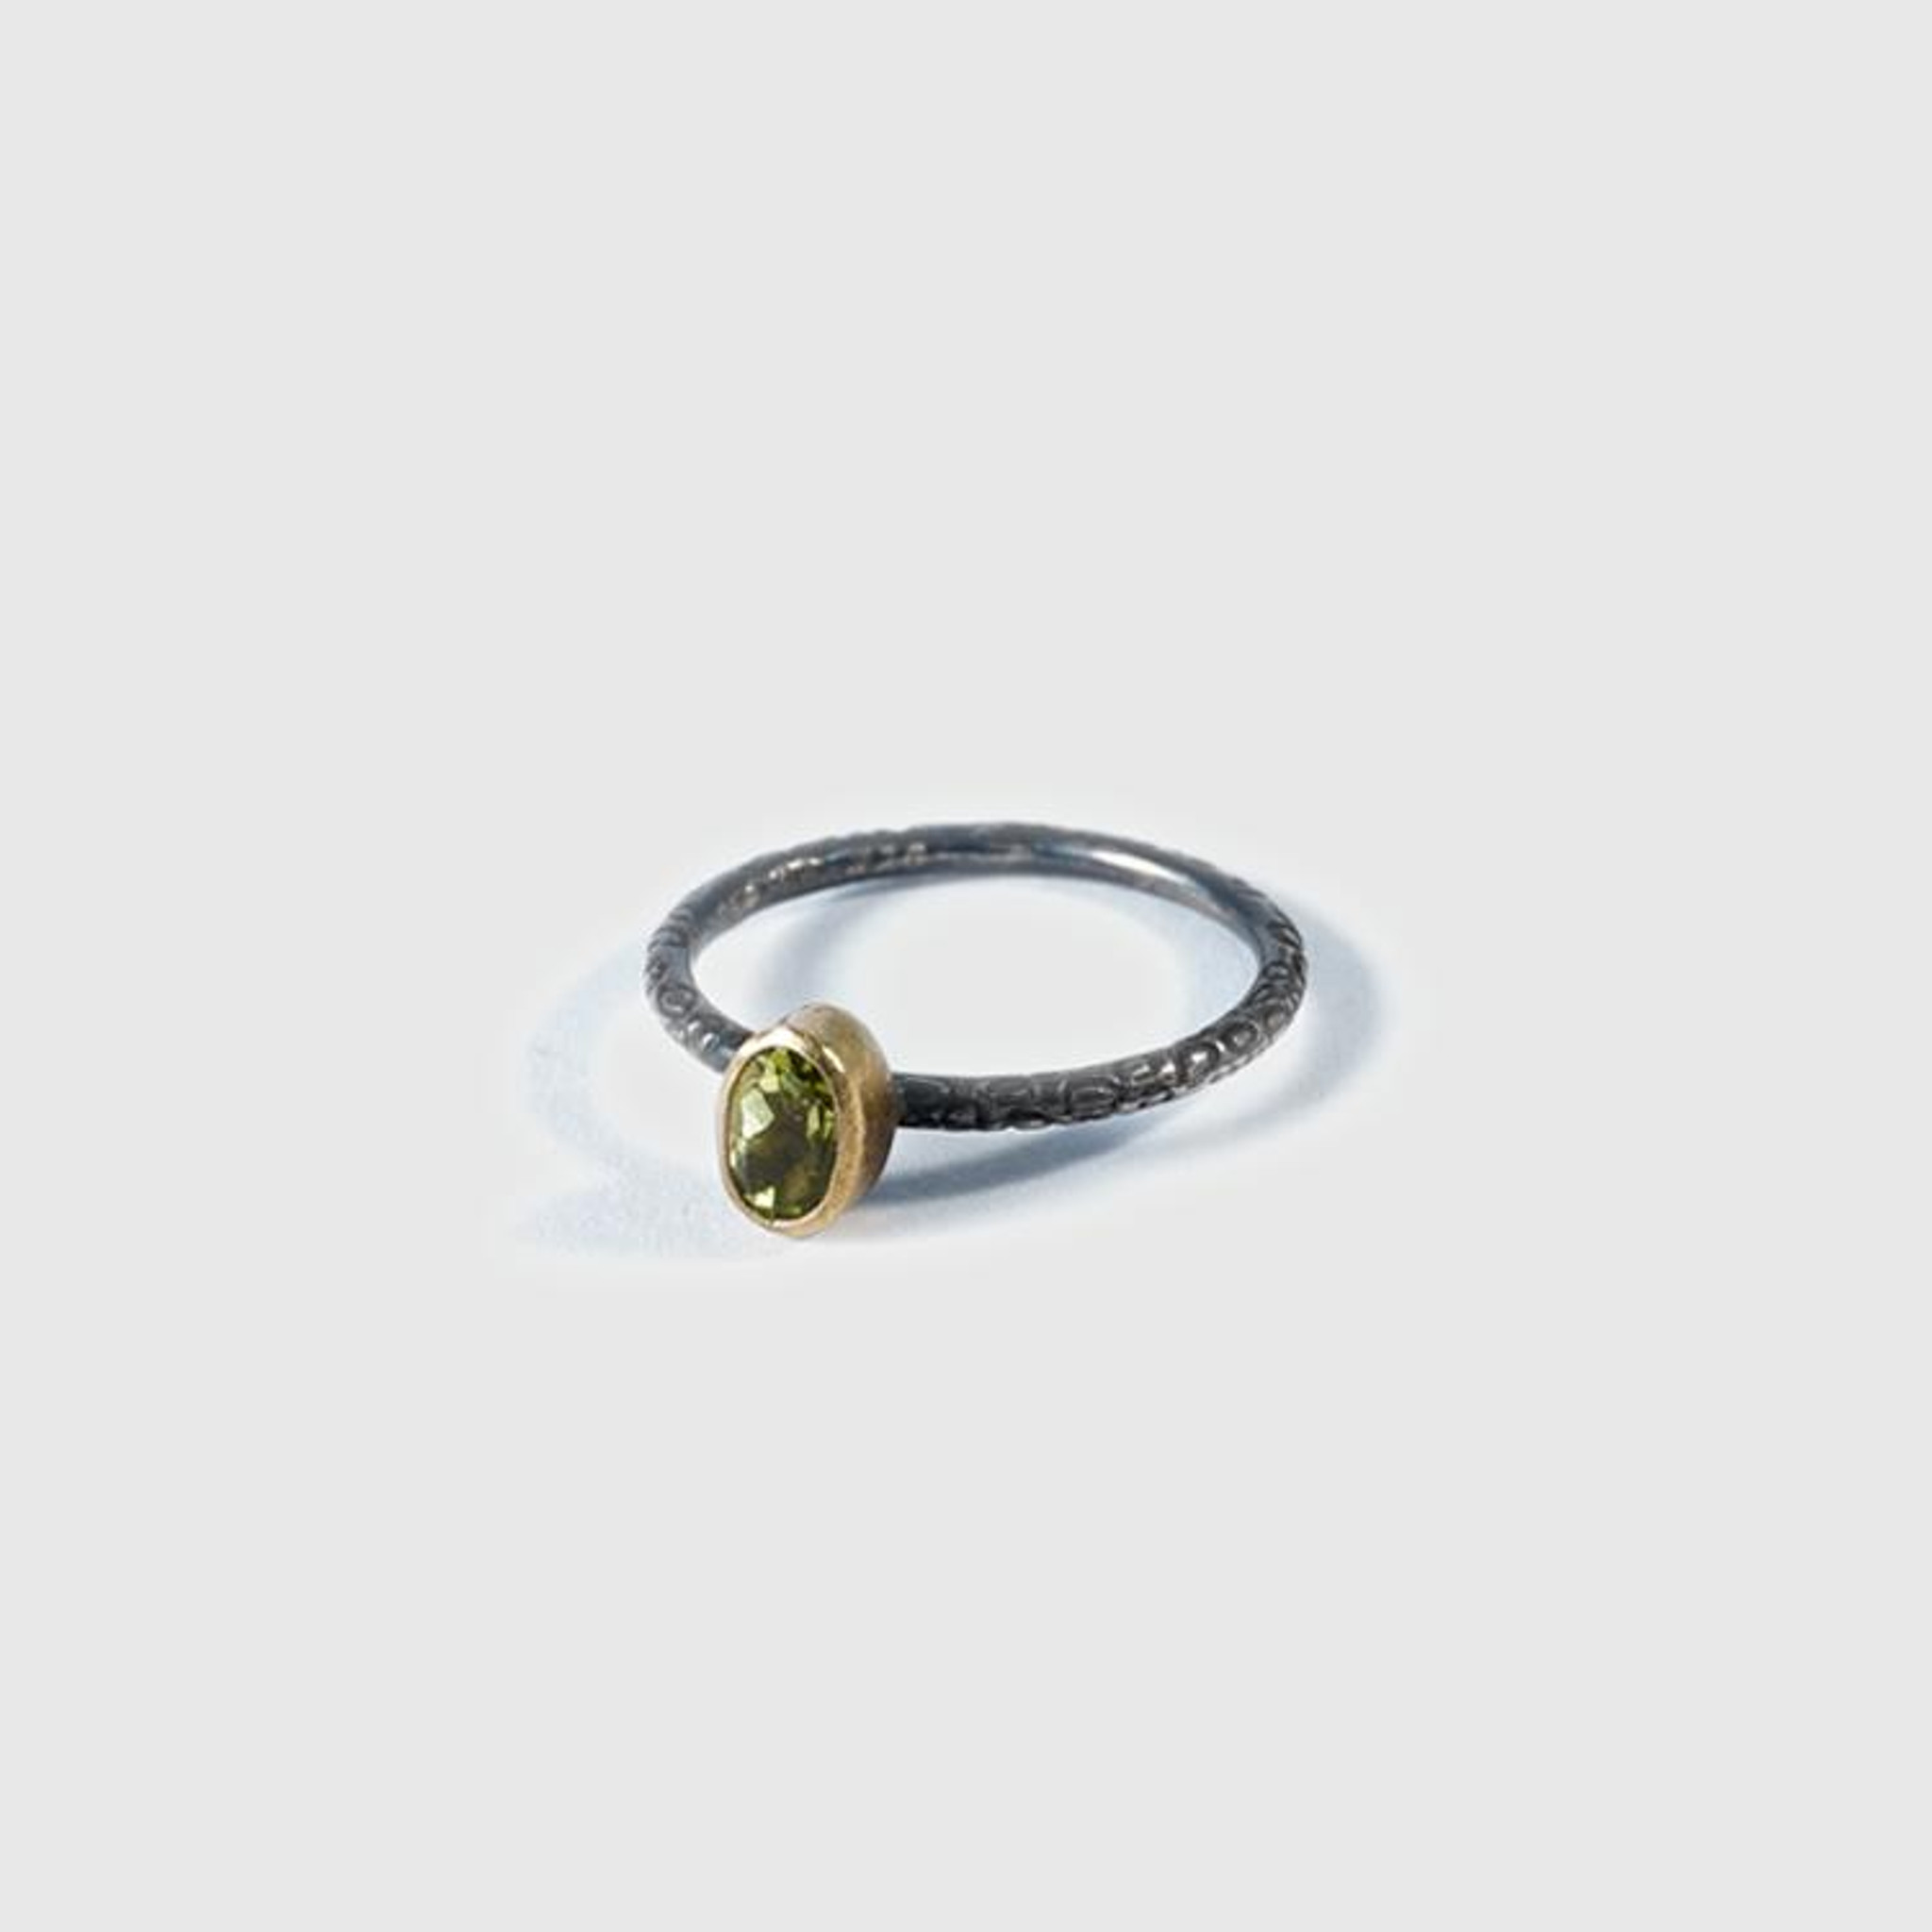 Prehistoric Works Bright Green, Oval Peridot Ring, 24kt Gold and Textured Sterling Silver Band 